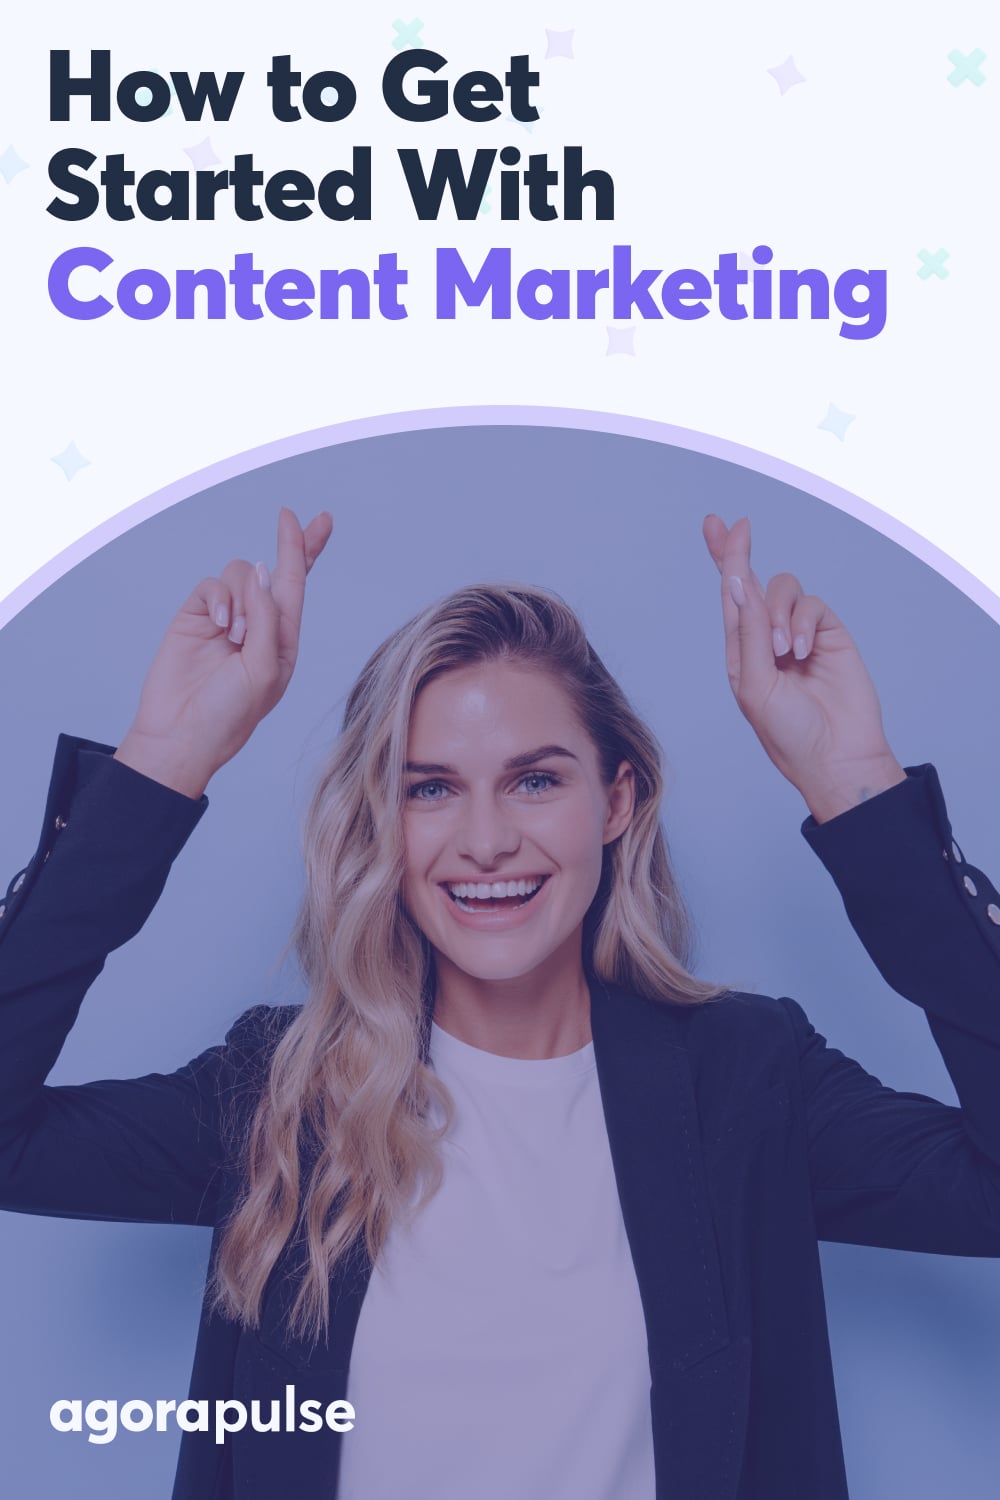 How to Get Started With Content Marketing